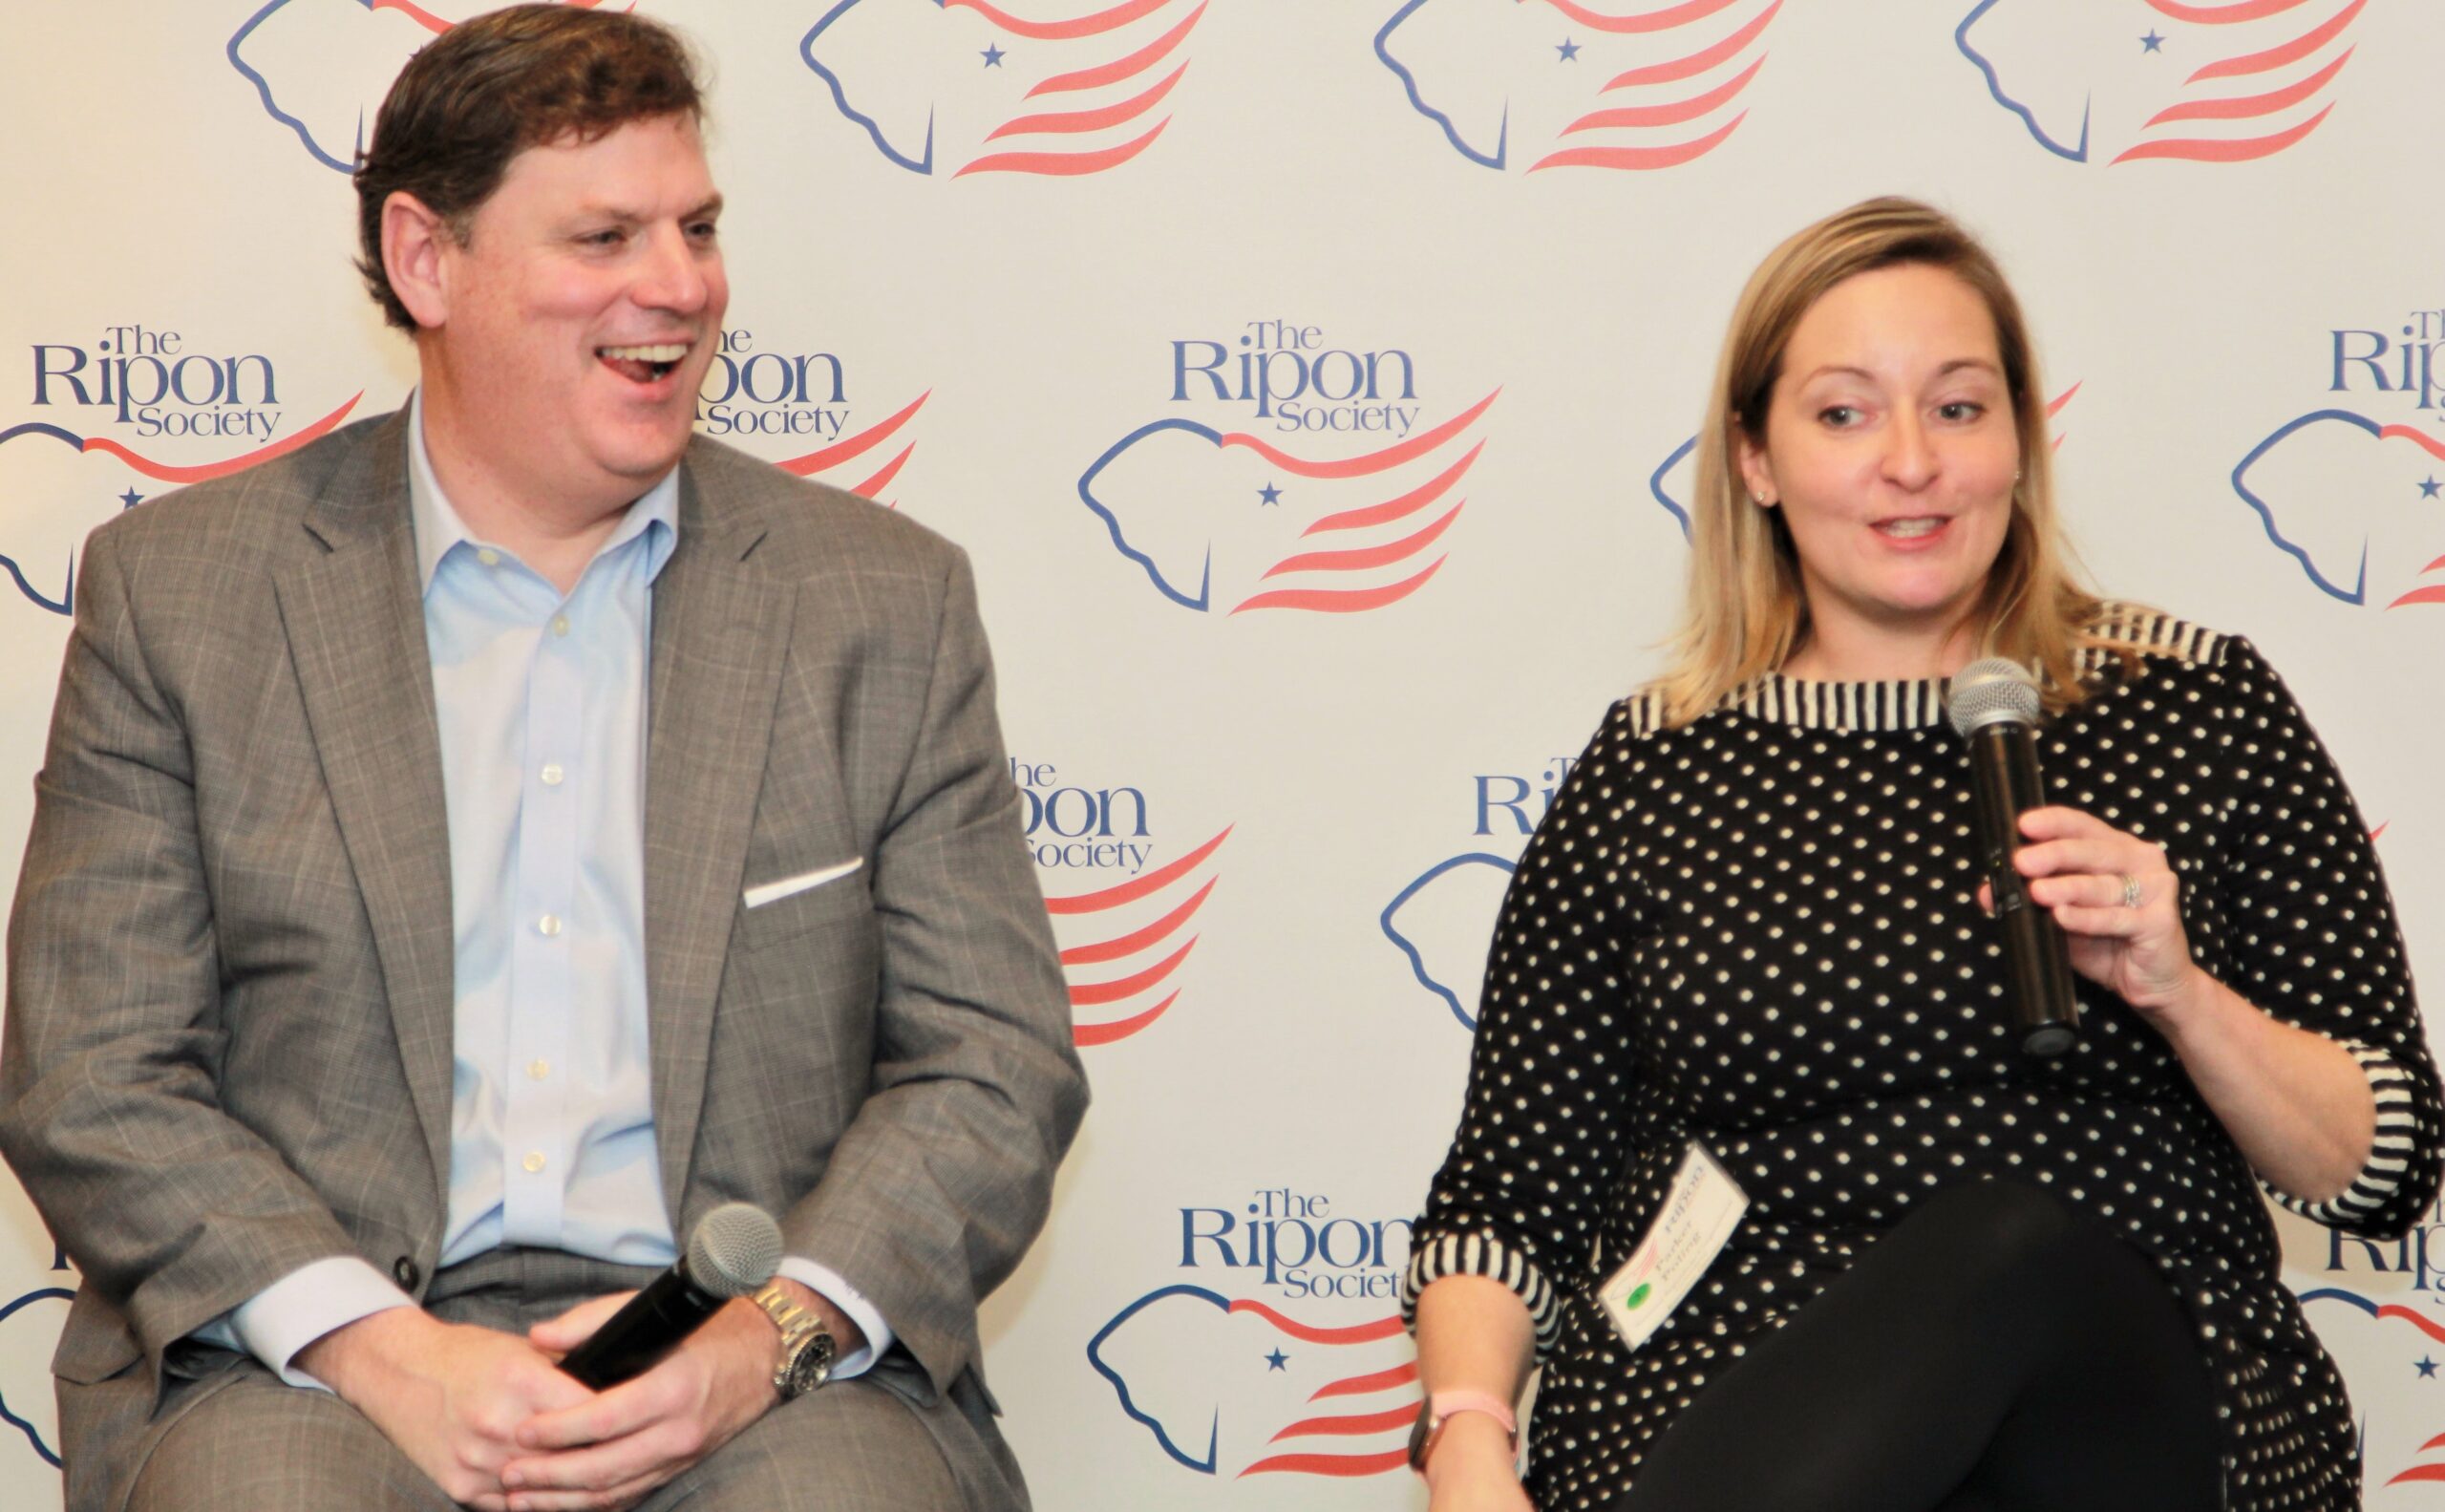 Ripon Society Holds Discussion with Top NRCC, NRSC Strategists